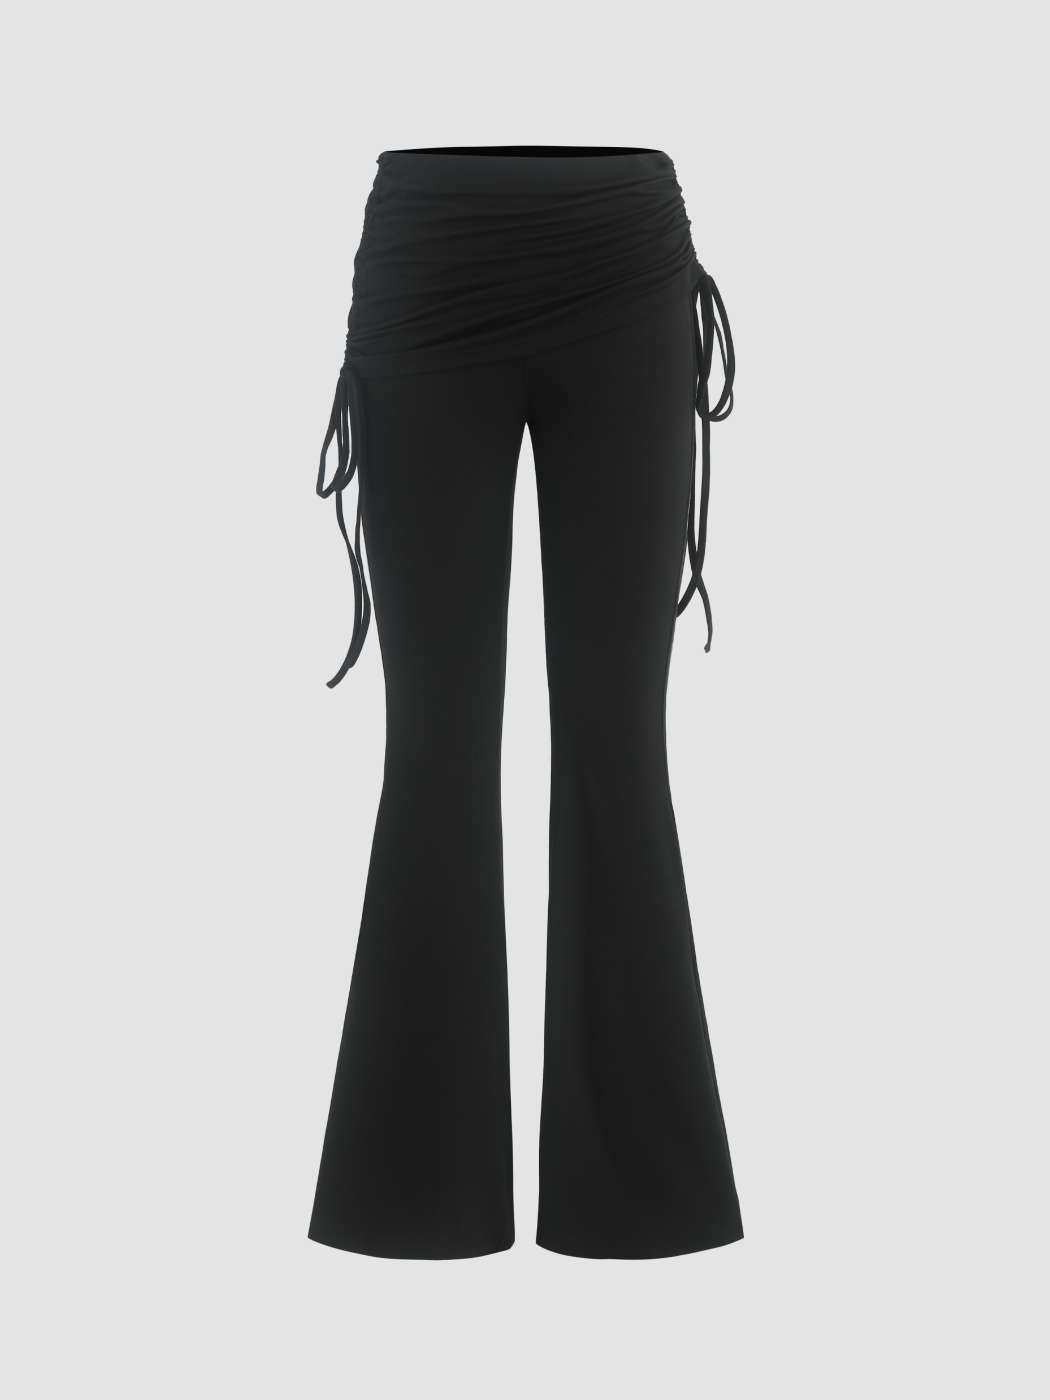 Jersey High Waist Knotted Ruched Flared Pants - Cider